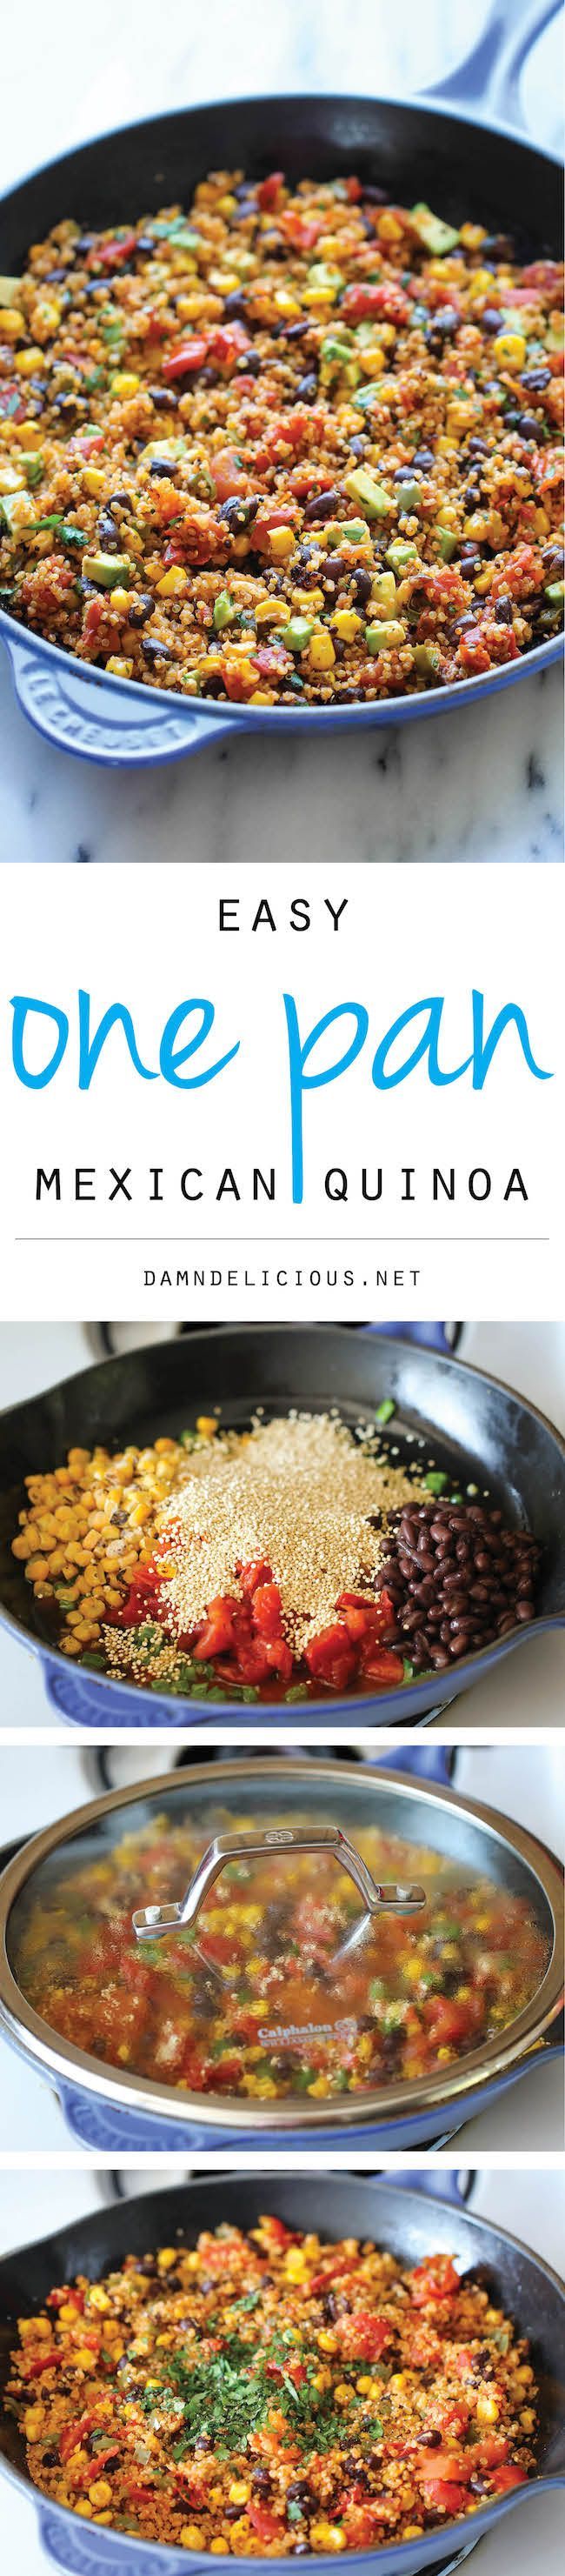 One Pan Mexican Quinoa – Wonderfully light, healthy and nutritious. And its so easy to make – even the quinoa is cooked right in